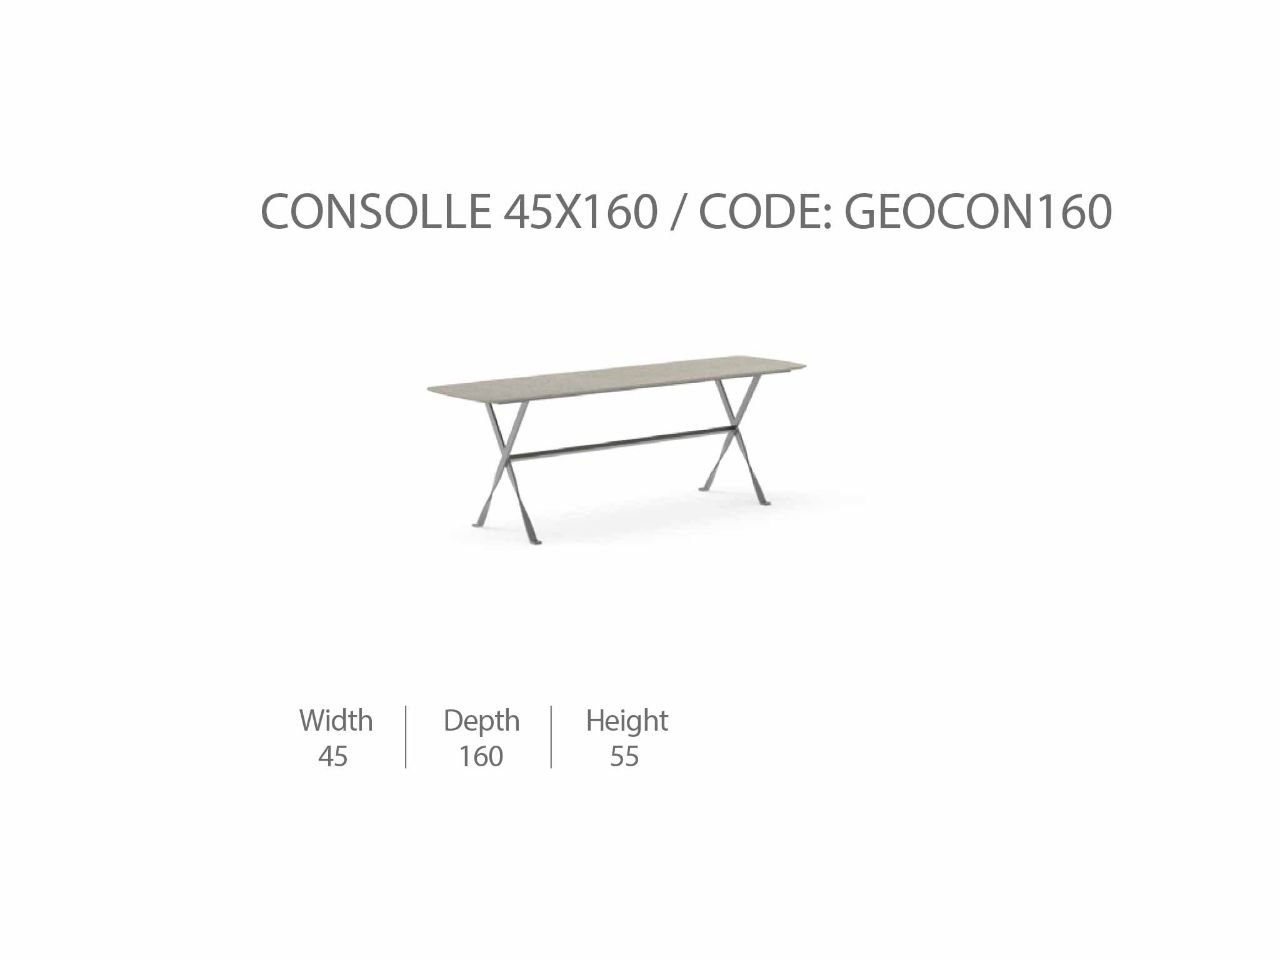 Consolle George 45x160 - 1